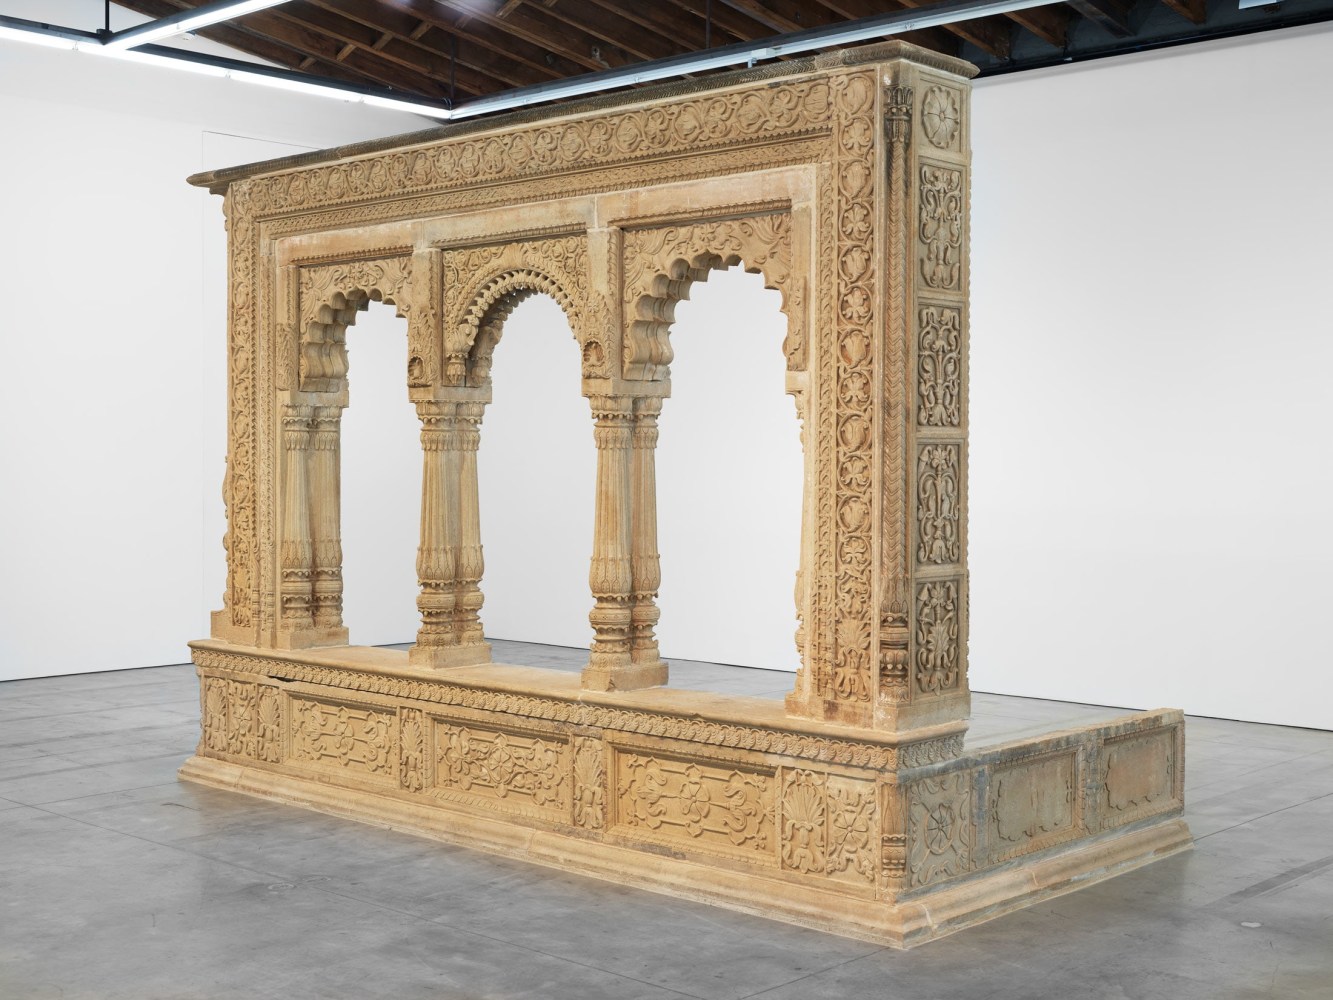 Pleasure Pavilion, Late 18th or early 19th century
Sandstone and brick
180 x 144 x 144 inches
(457.2 x 365.76 x 365.76 cm)